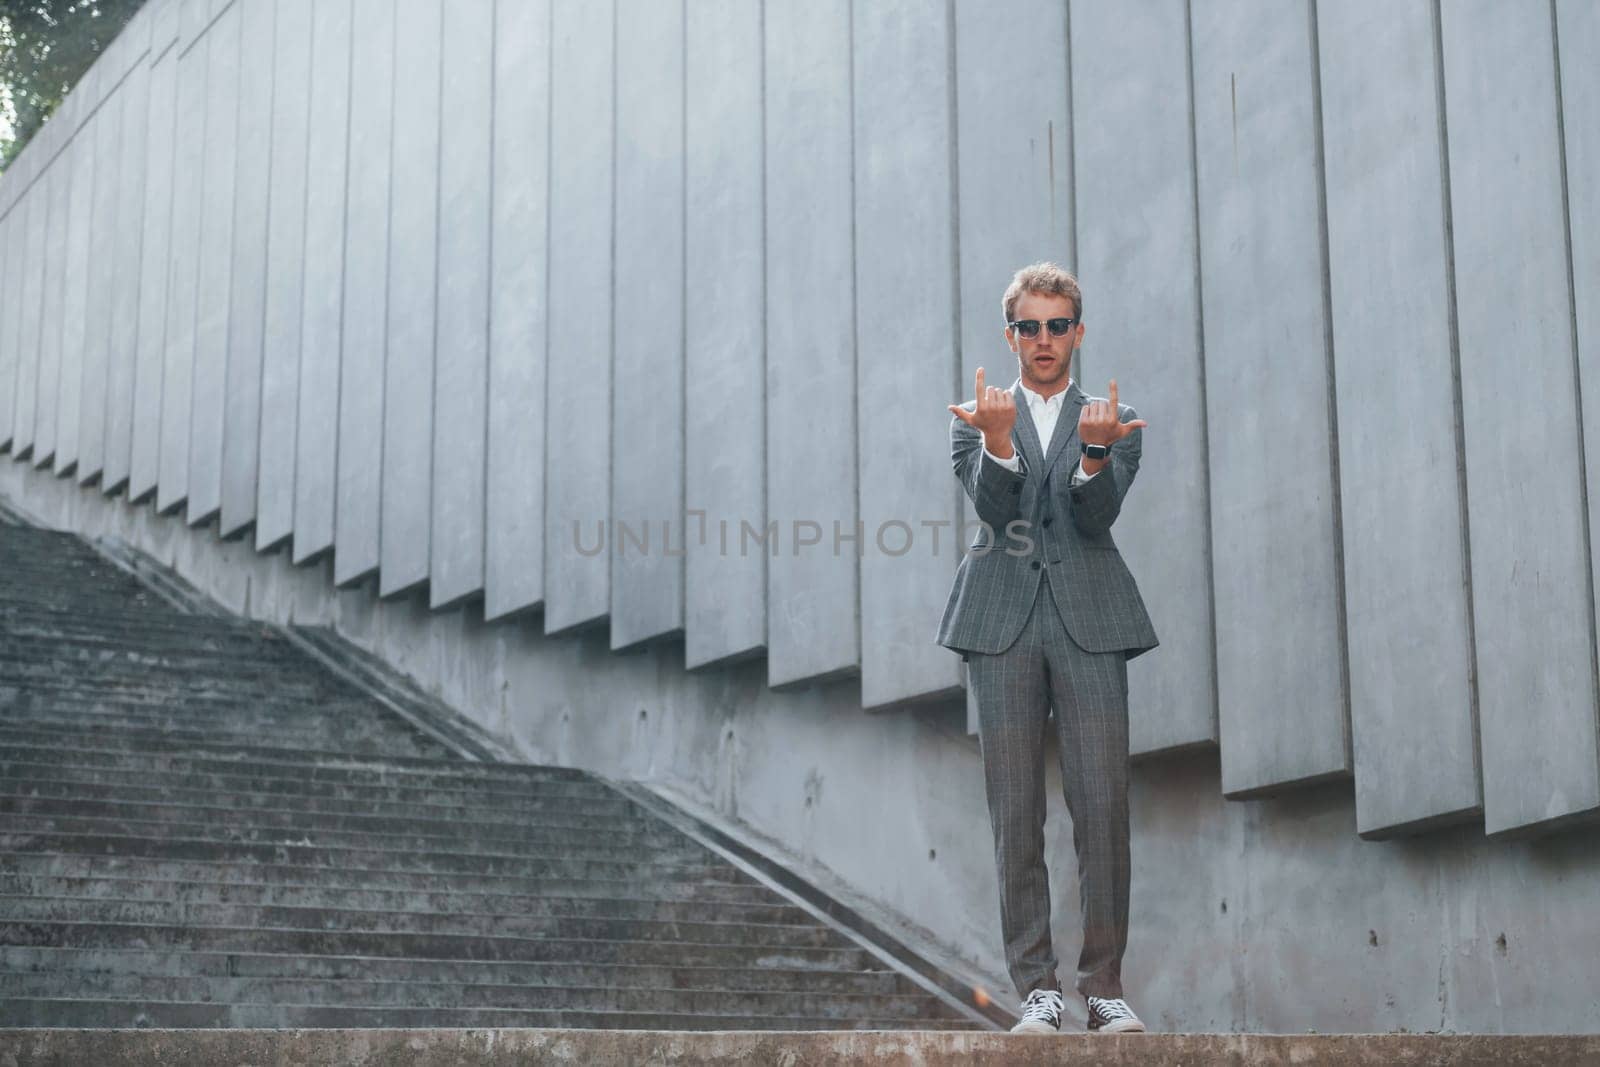 Posing for a camera. Young businessman in grey formal wear is outdoors in the city.